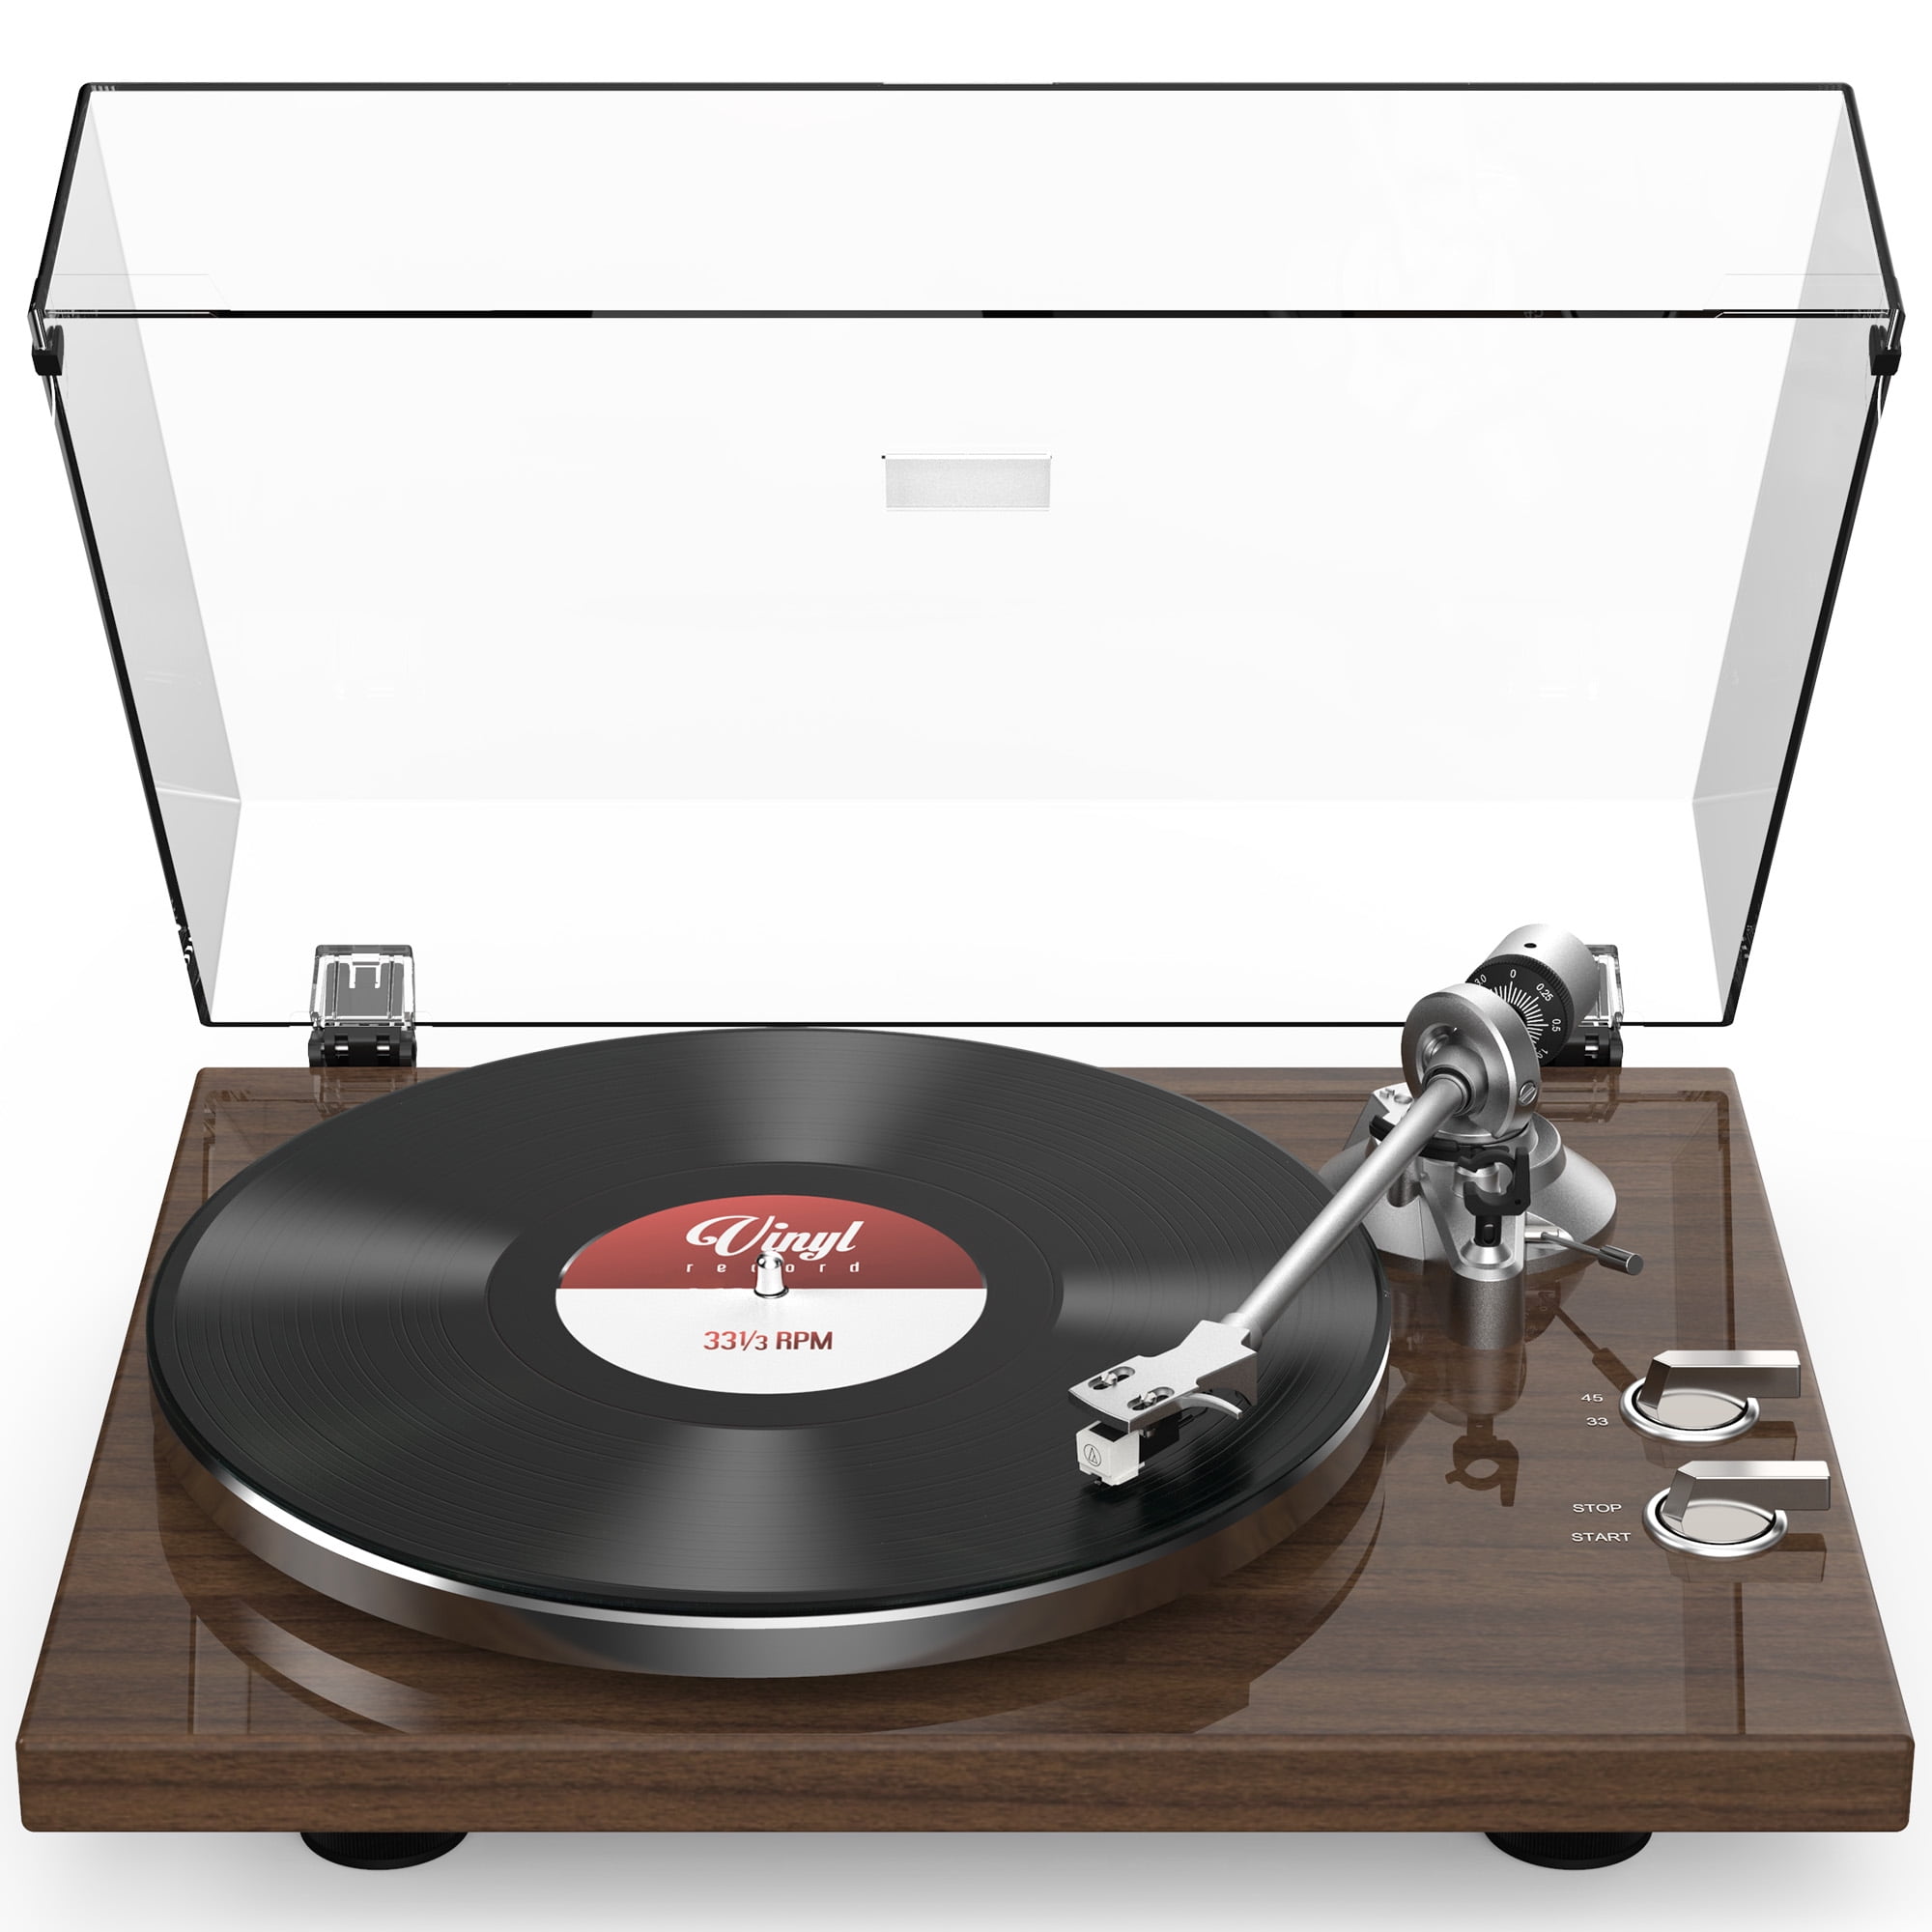 Udreamer Record Player Turntable Record Player Bluetooth Wireless Turntable with Built-In Speakers and USB Belt-Driven Vintage Phonograph Vinyl Record